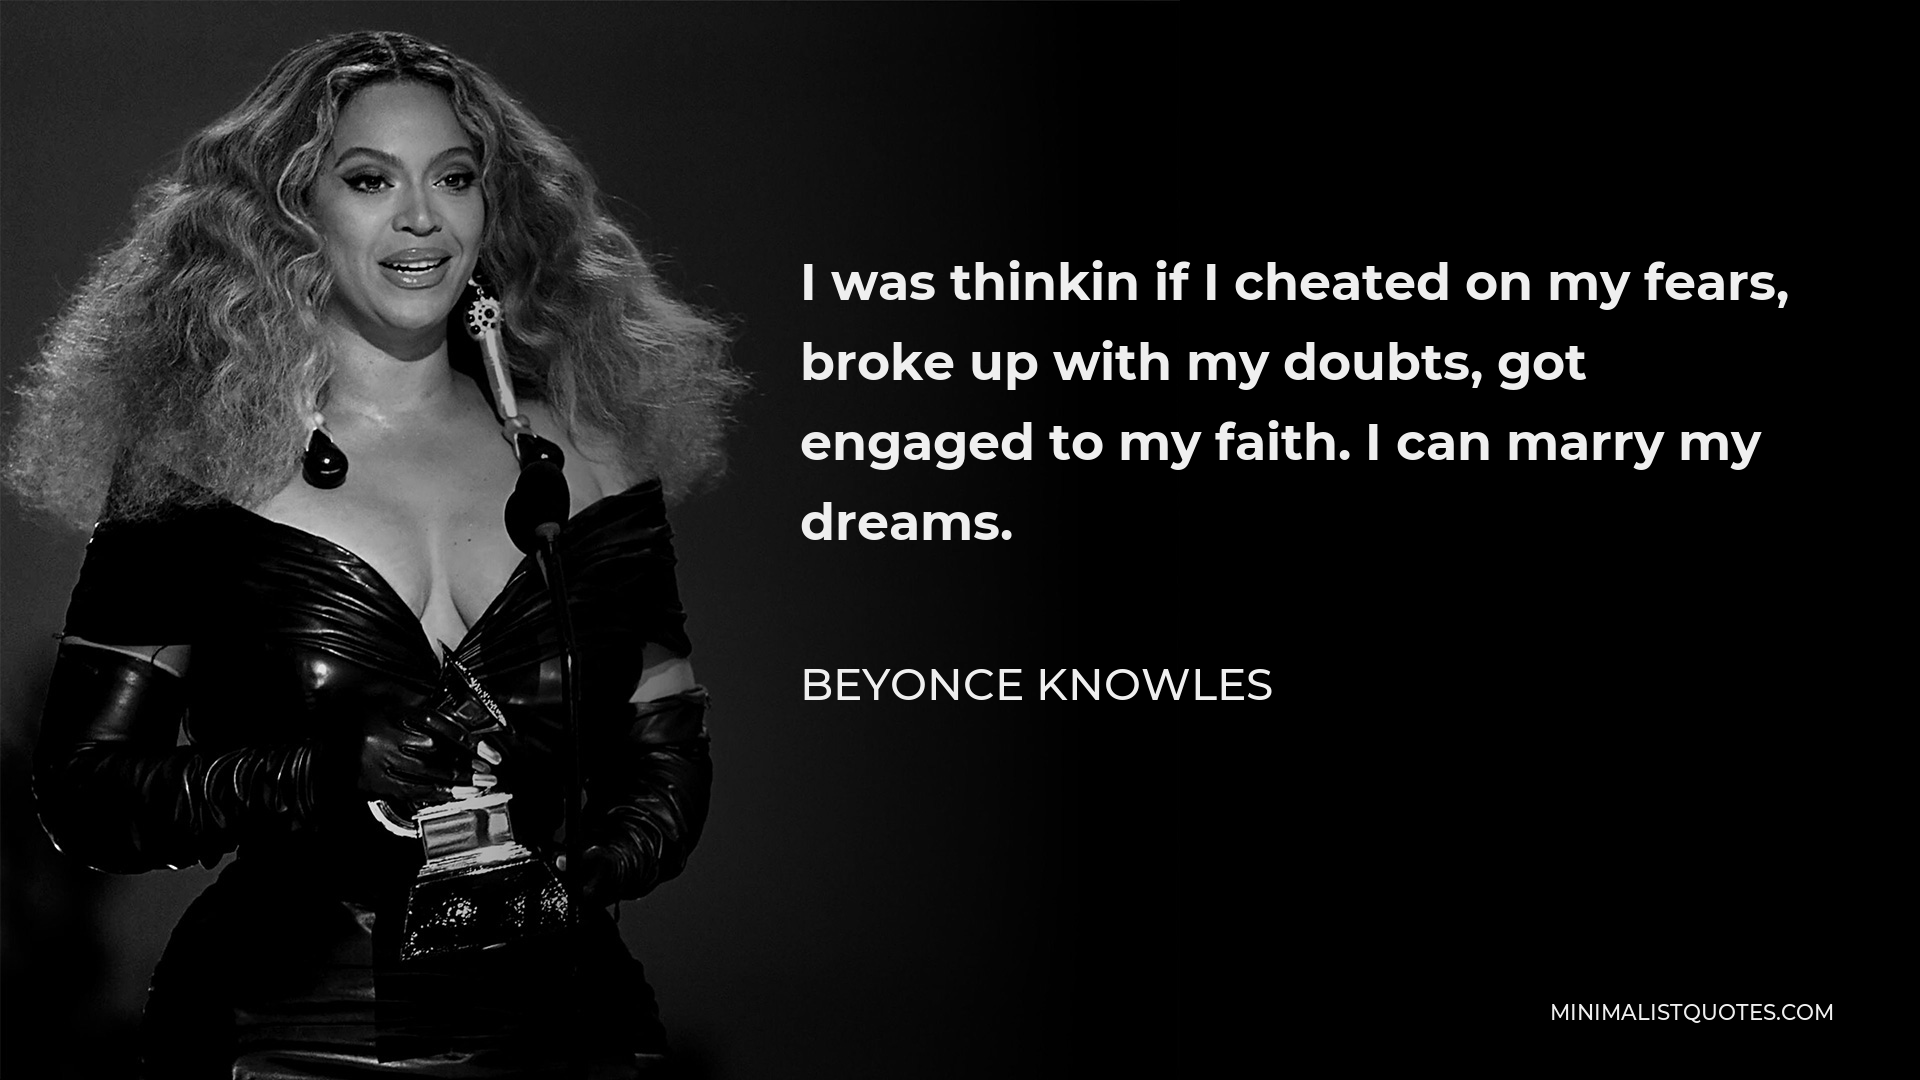 Beyonce Knowles Quote - I was thinkin if I cheated on my fears, broke up with my doubts, got engaged to my faith. I can marry my dreams.